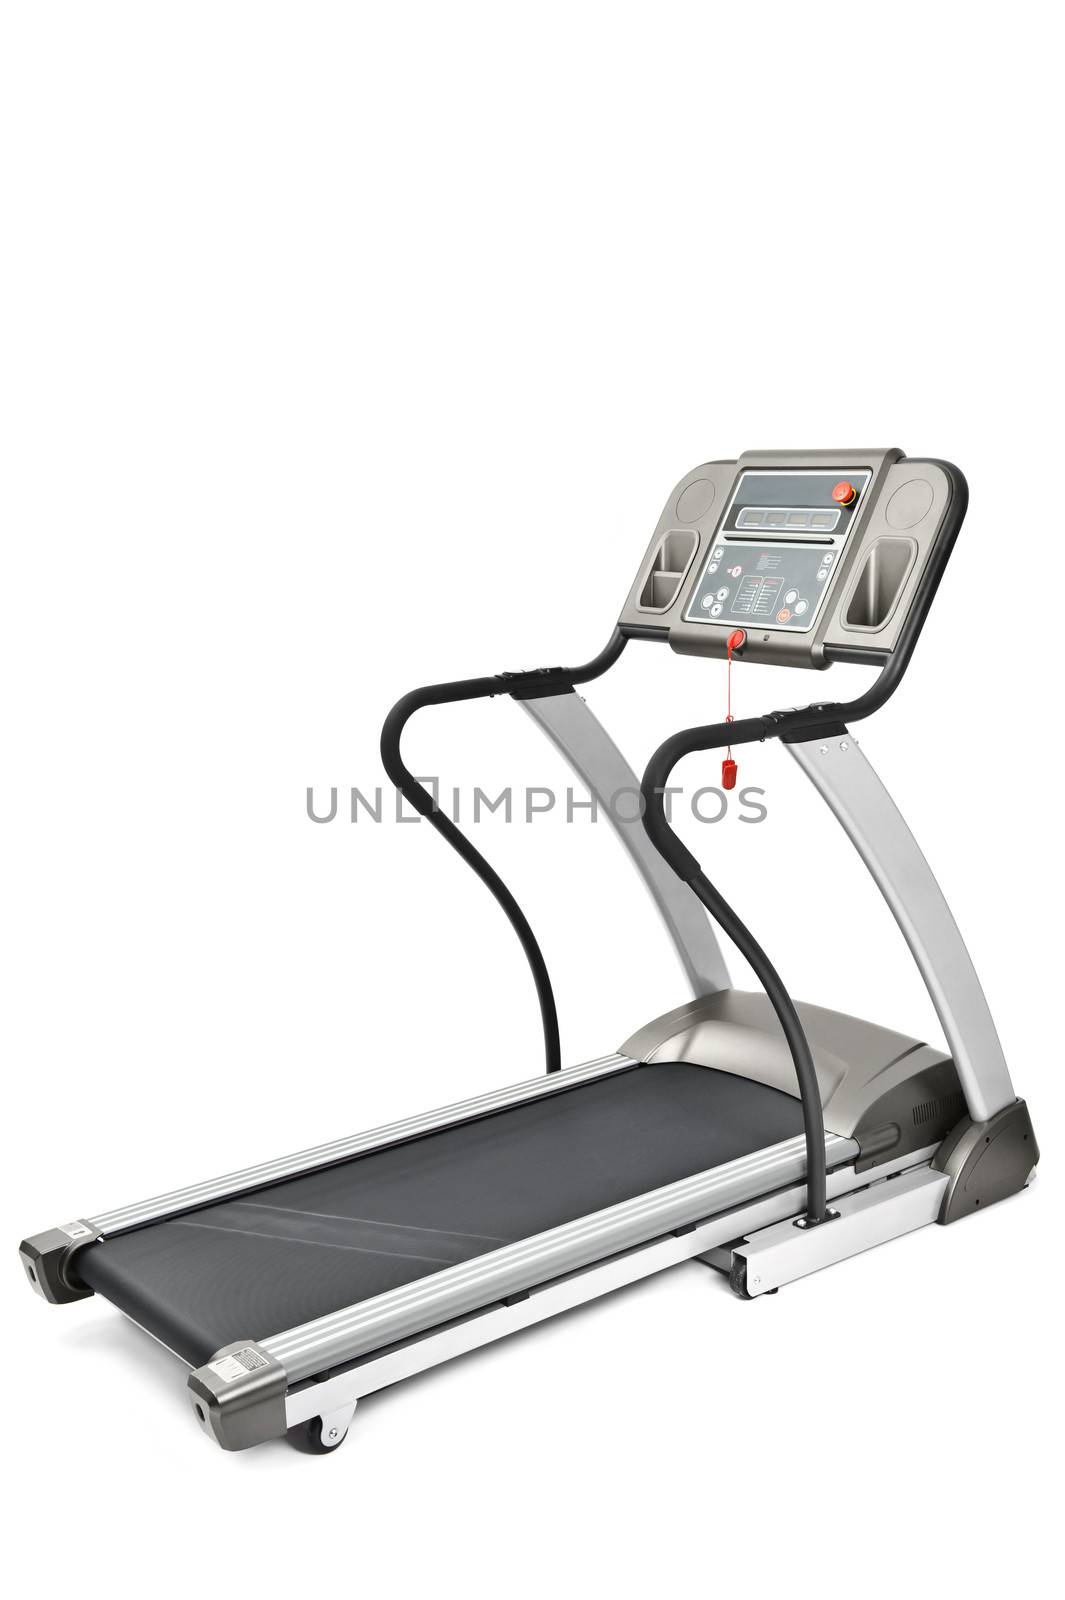 gym equipment, spinning machine for cardio workouts by starush